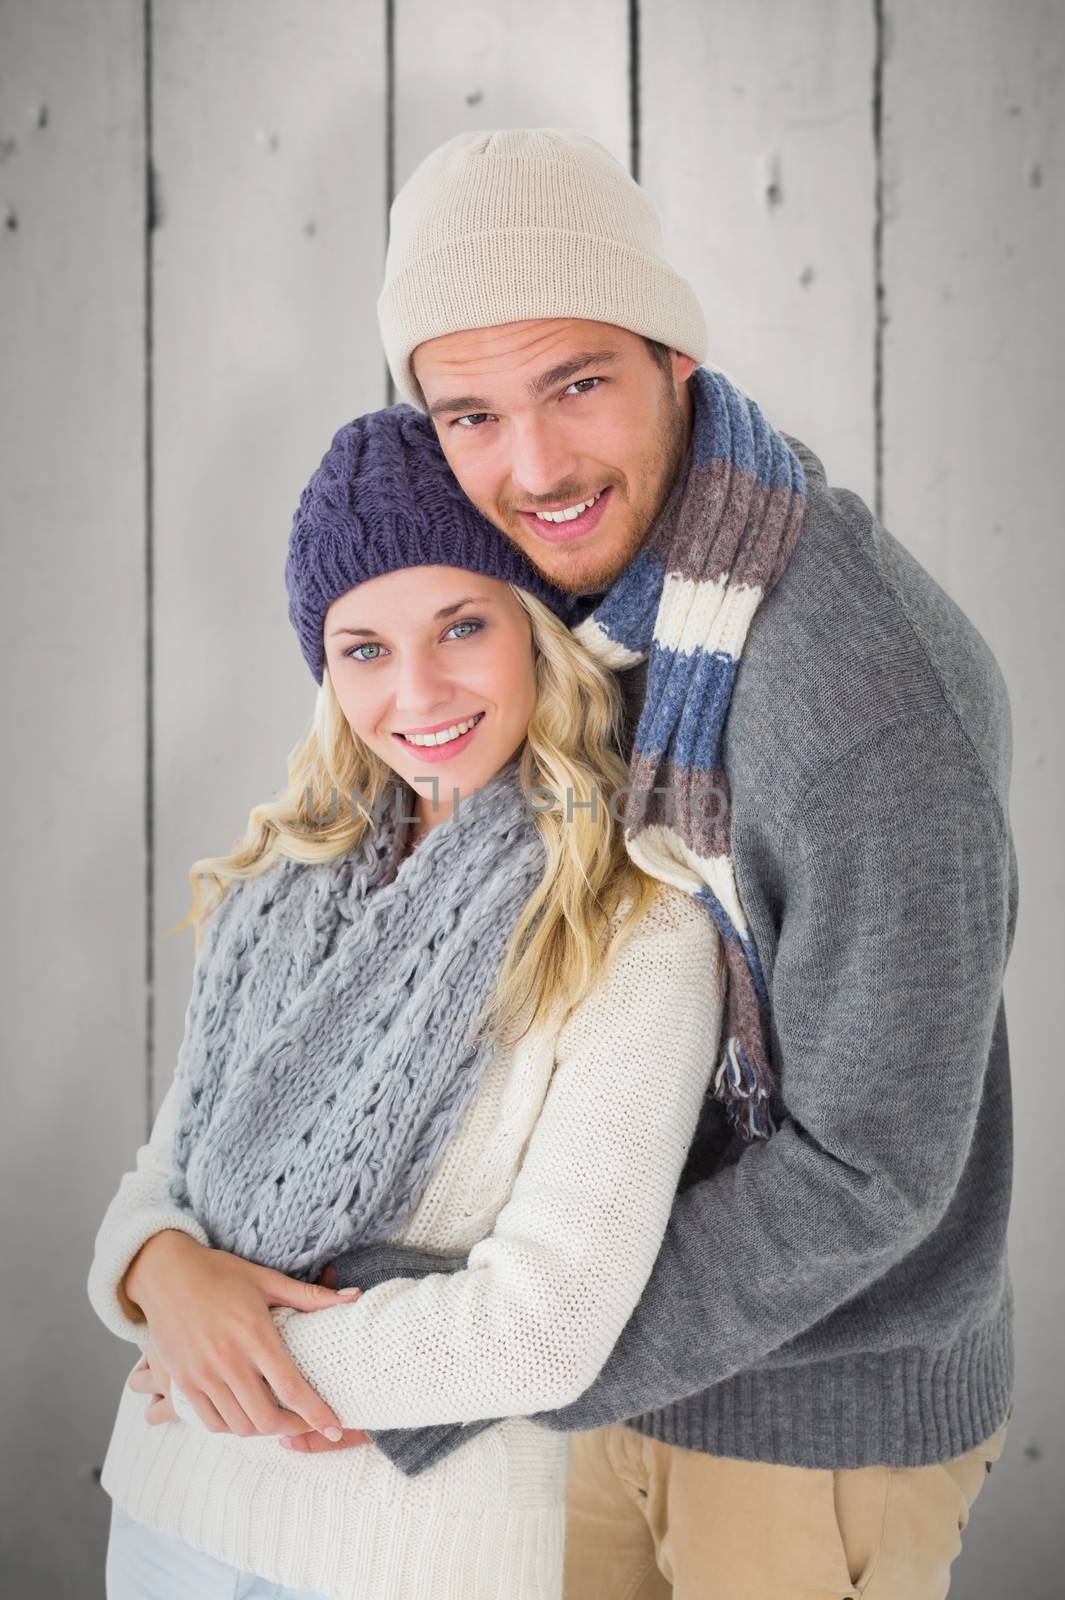 Attractive couple in winter fashion hugging against white wood